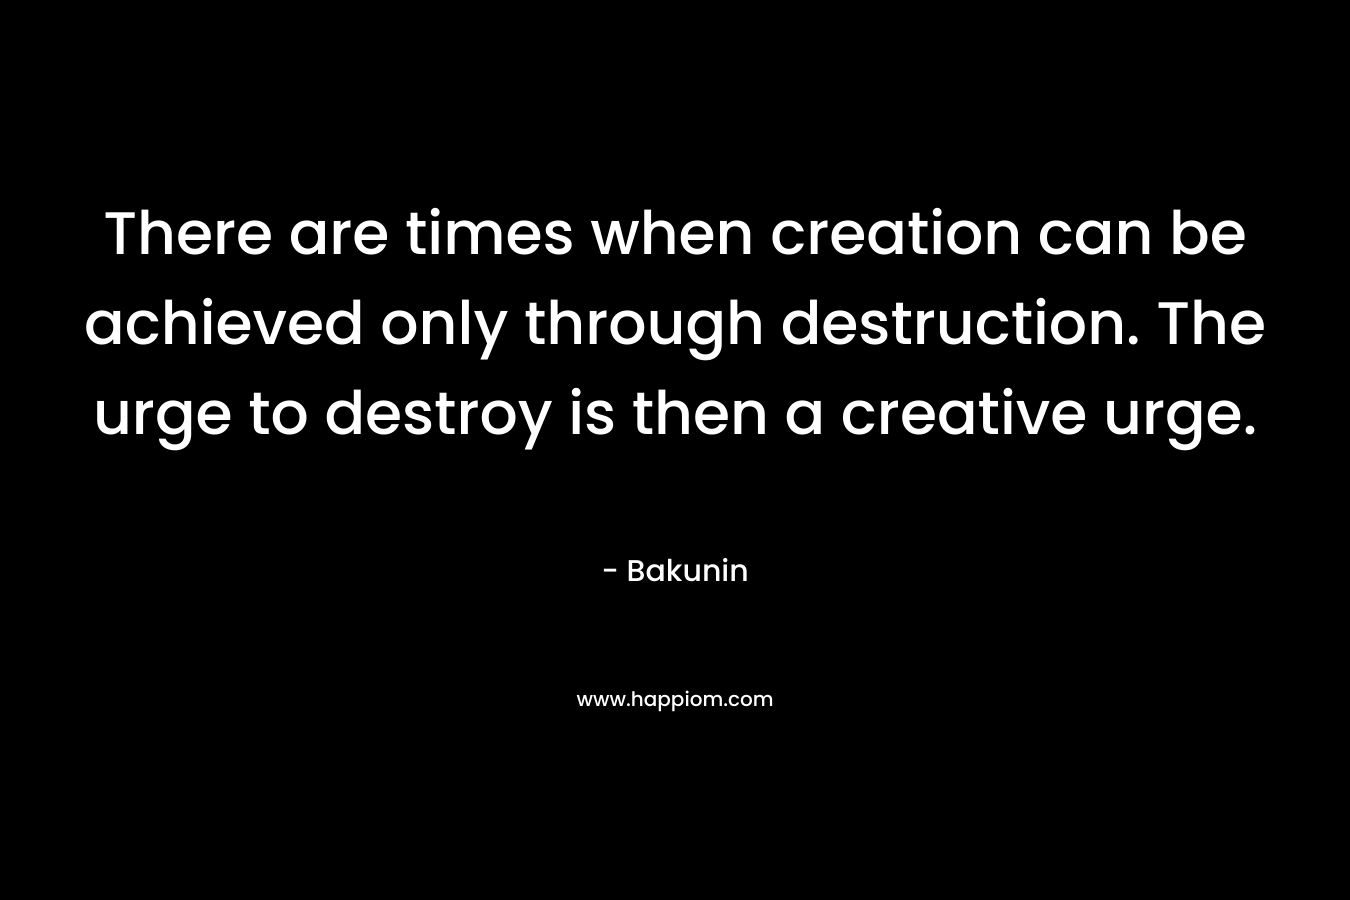 There are times when creation can be achieved only through destruction. The urge to destroy is then a creative urge.